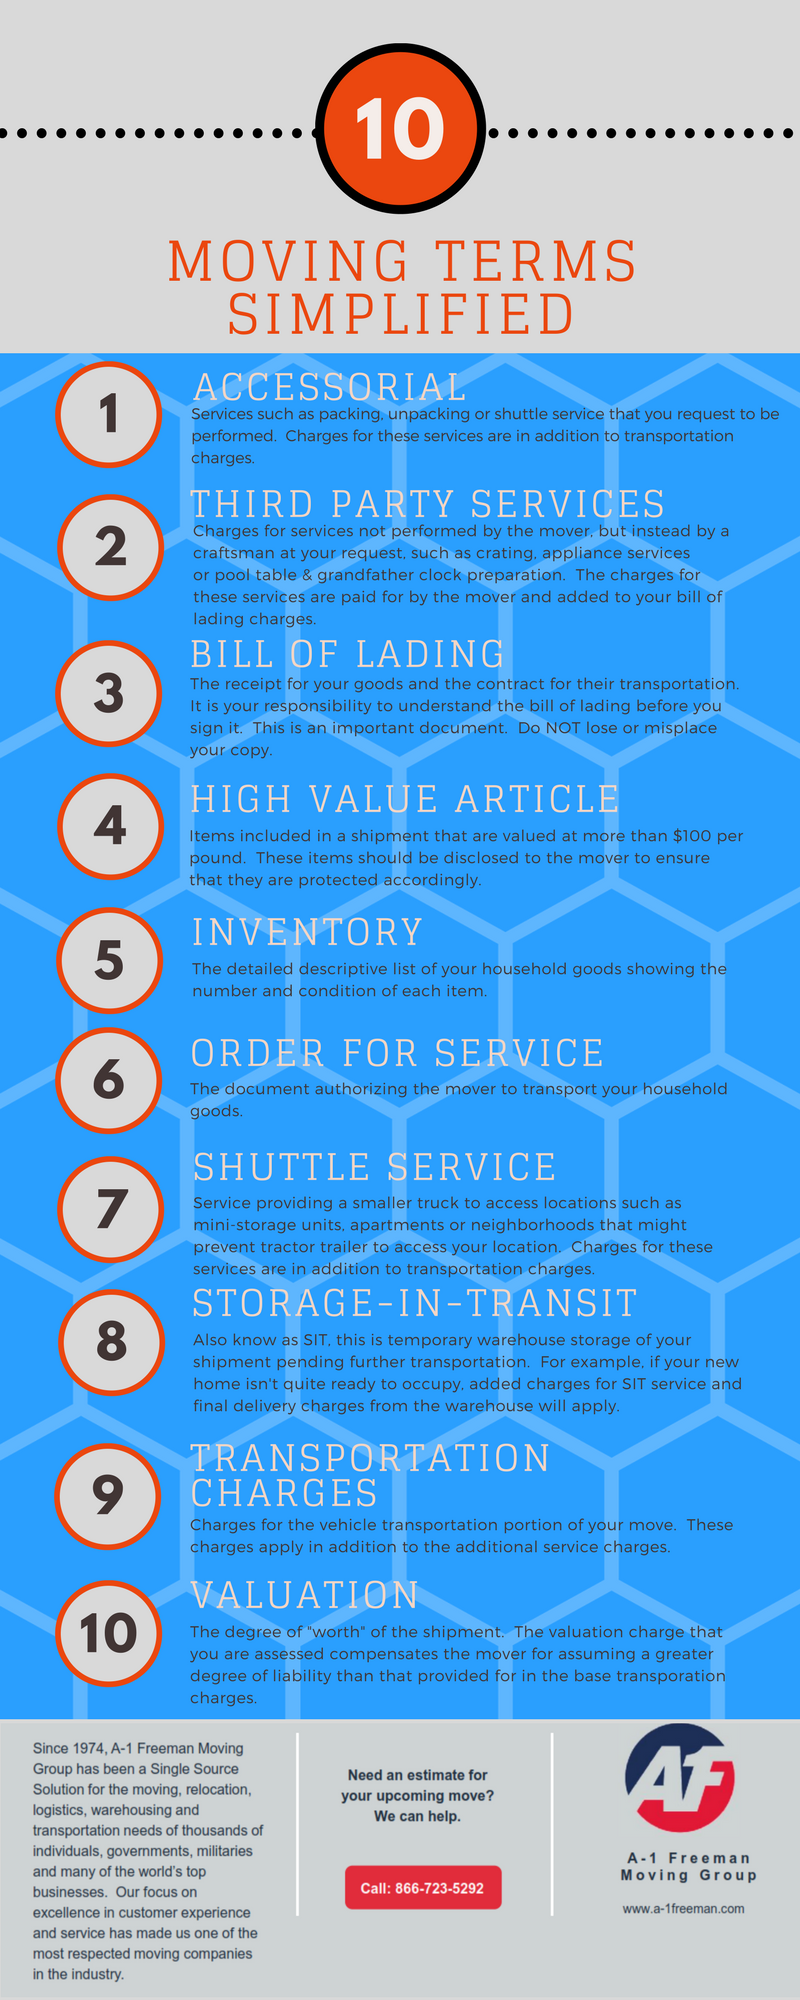 A-1 Freeman Moving Group Colorado Springs Moving Terms Infographic